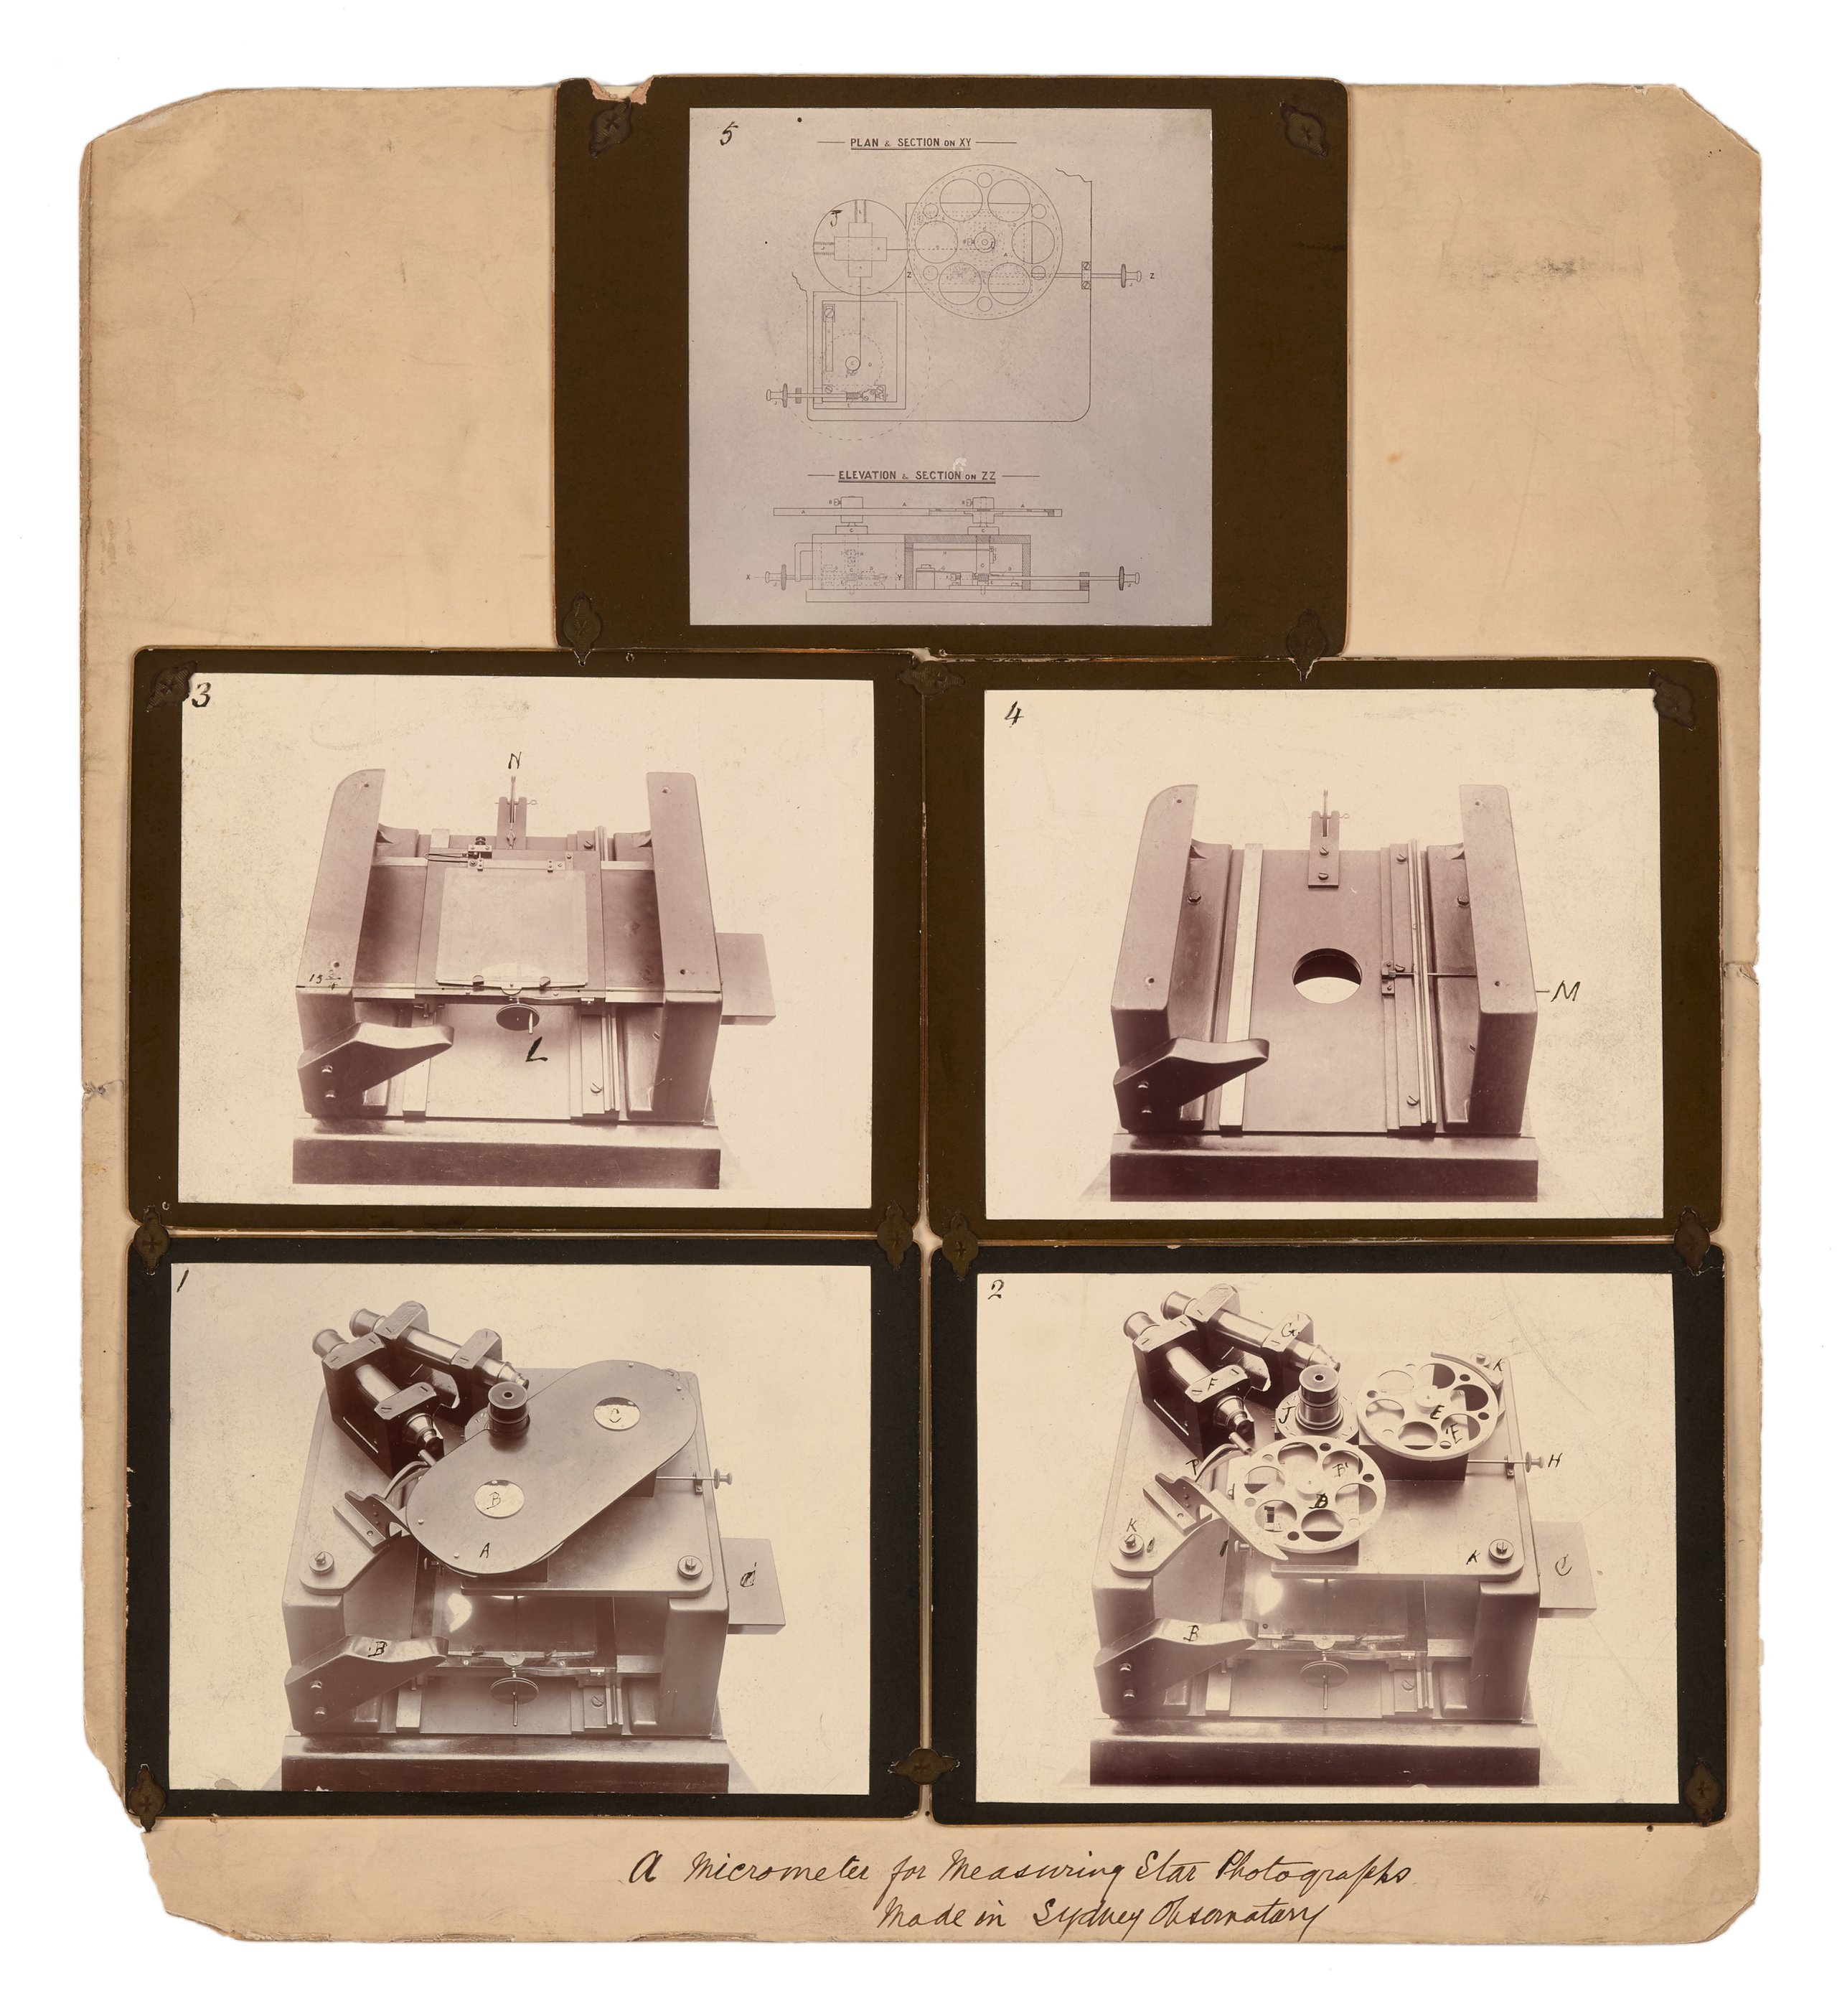 Photograph of photographic composite micrometers used by Sydney Observatory